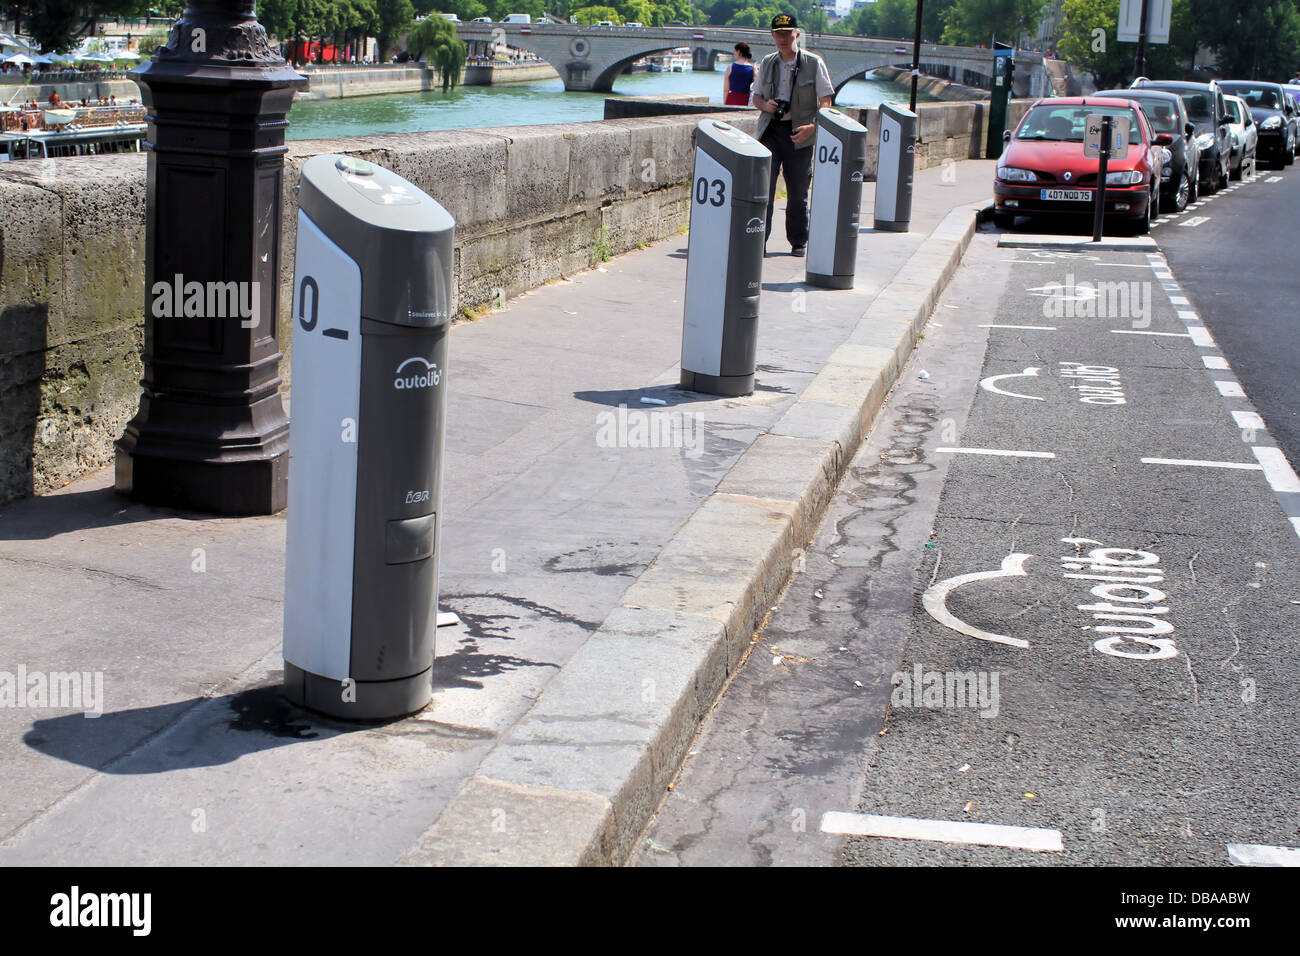 Autolib charging stations on Quai aux Fleurs, Paris. Autolib is the electric car sharing service started in December 2011 Stock Photo